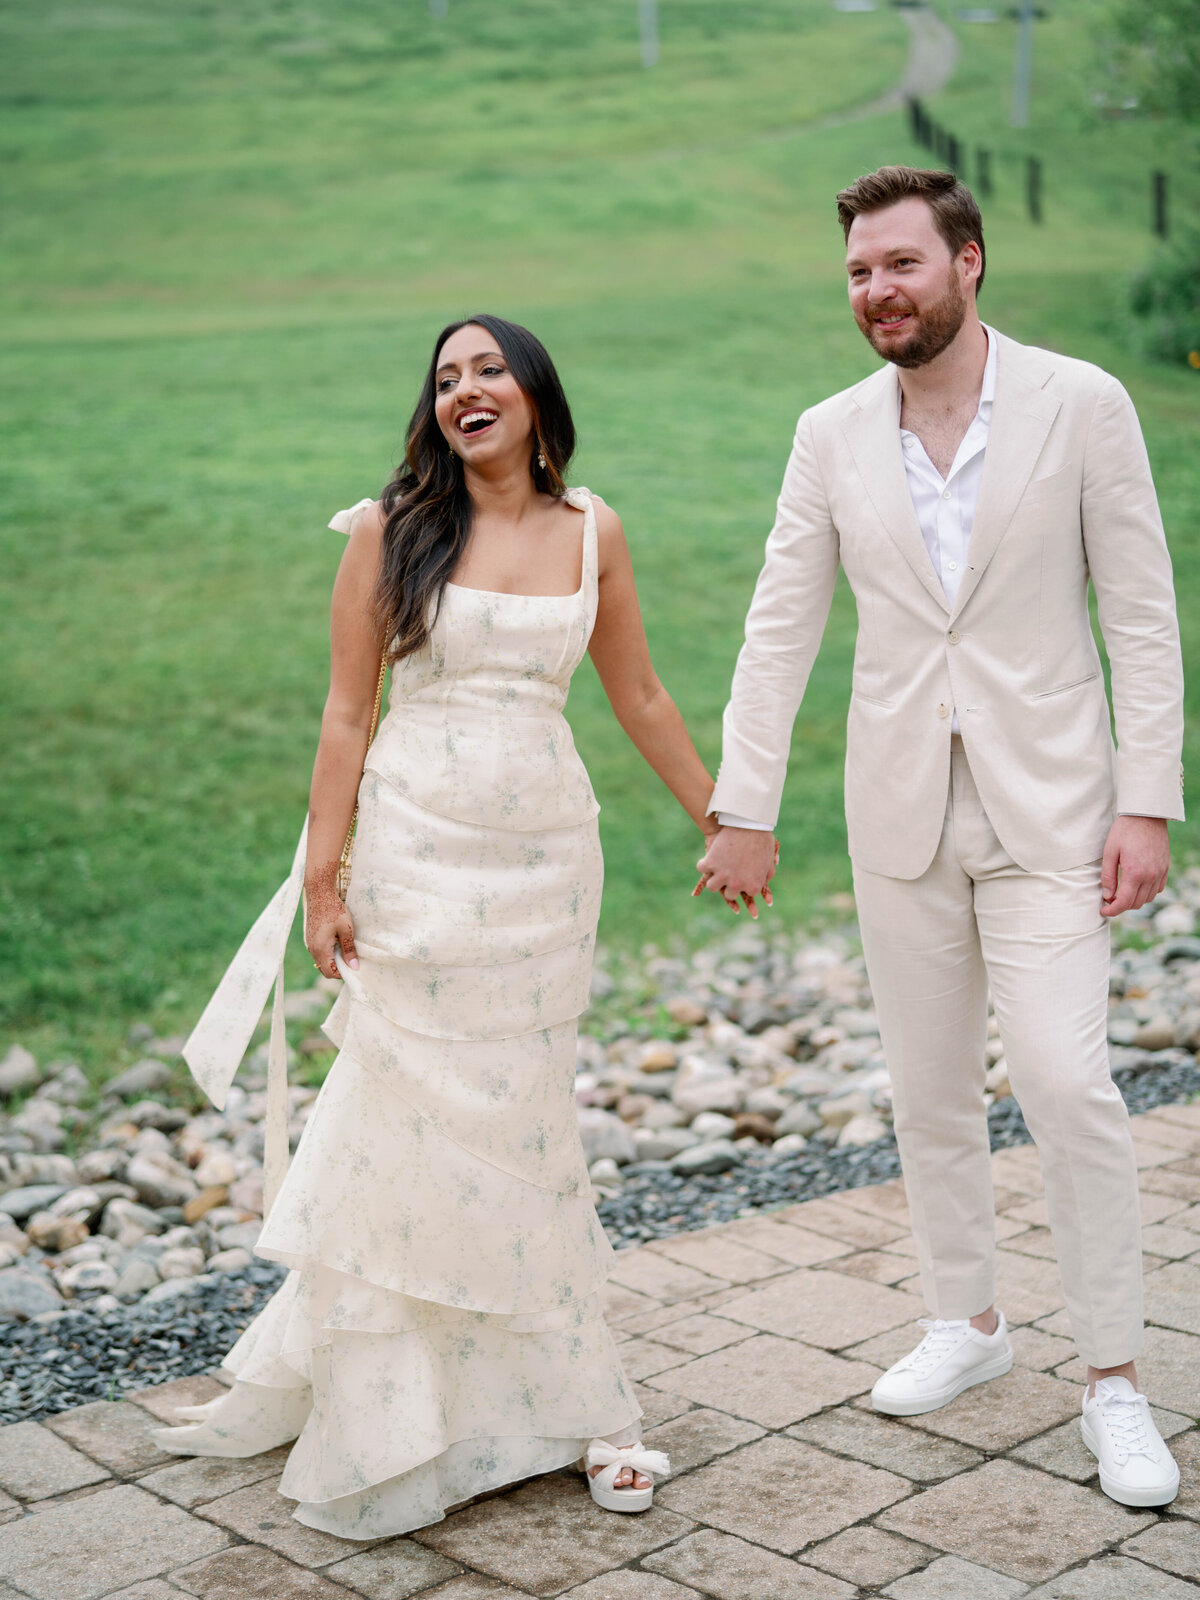 Liz Andolina Photography Destination Wedding Photographer in Italy, New York, Across the East Coast Editorial, heritage-quality images for stylish couples-903